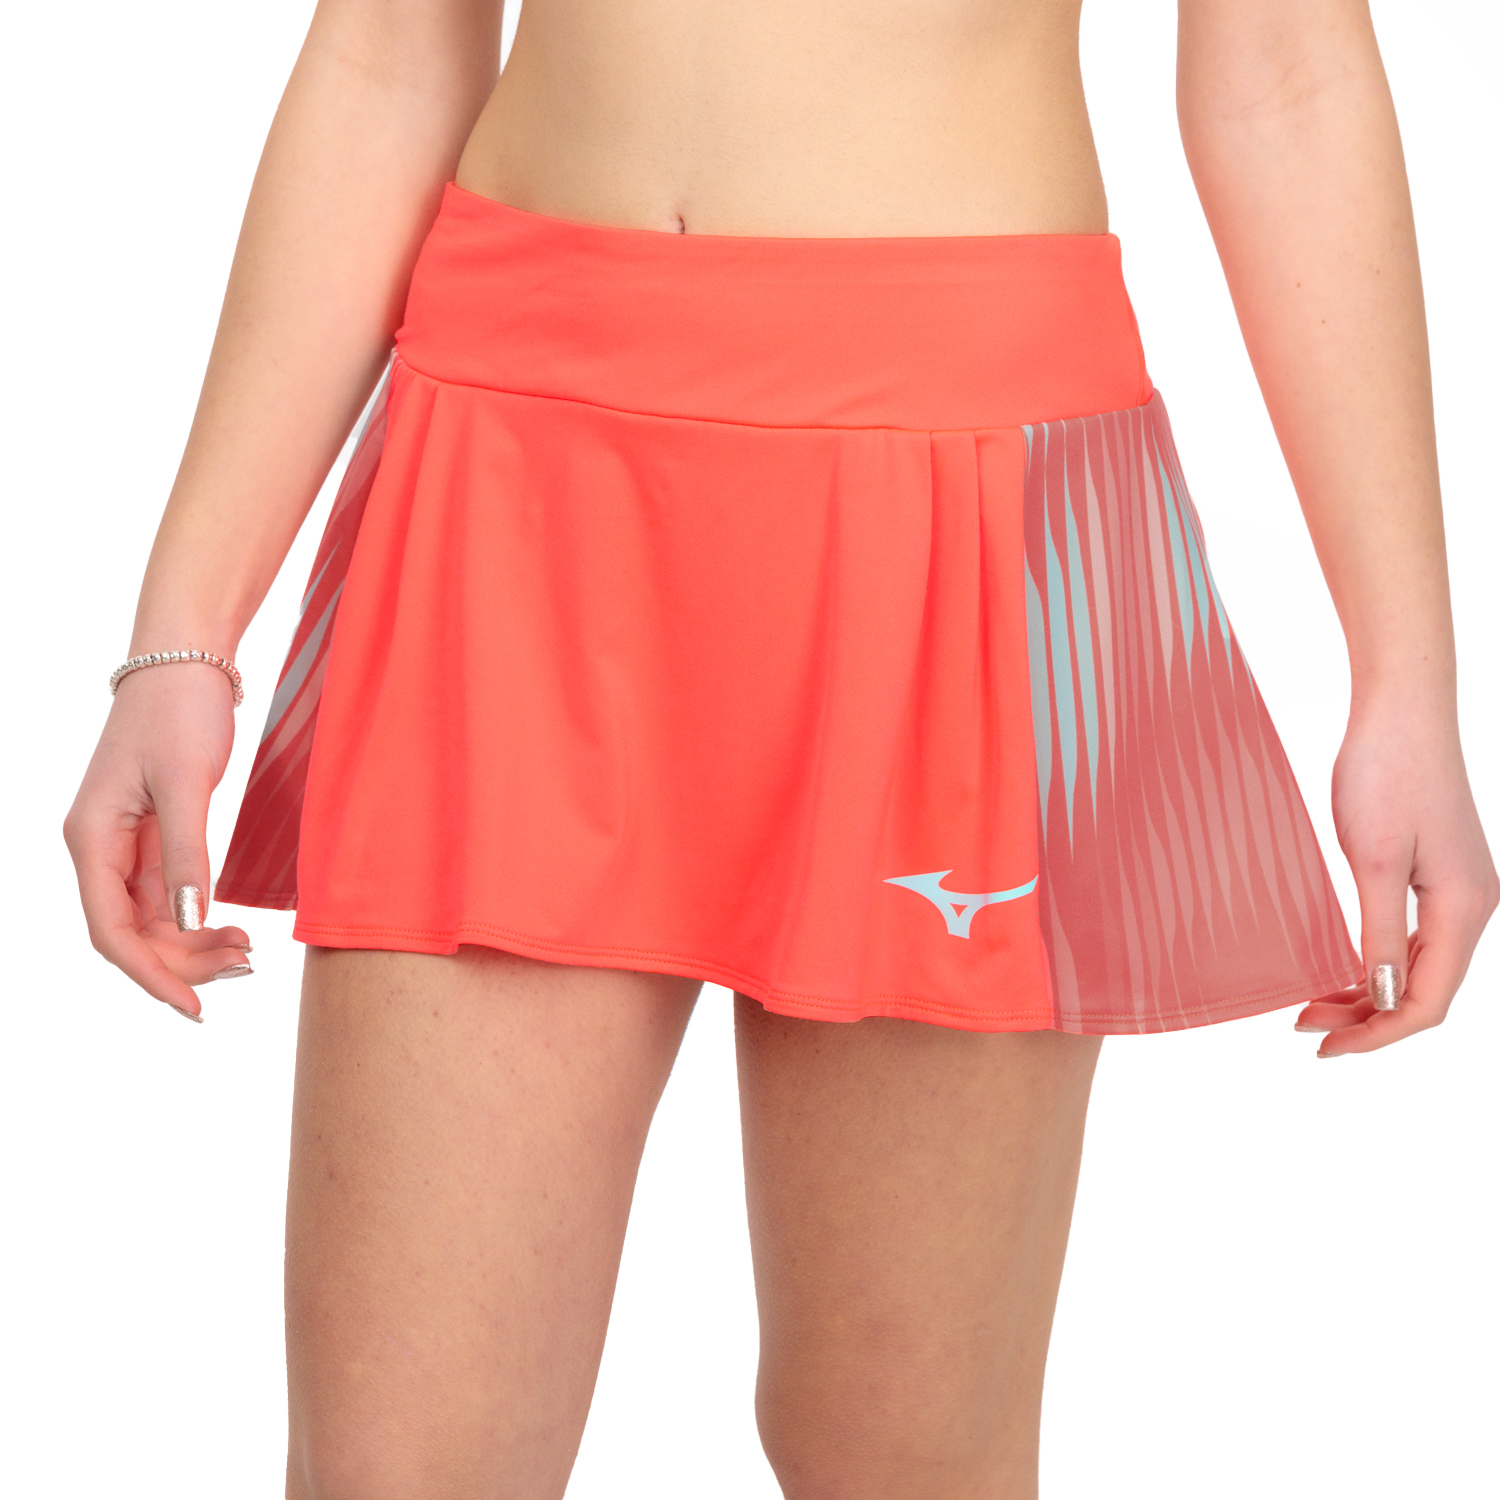 Mizuno Printed Flying Skirt - Fierry Coral